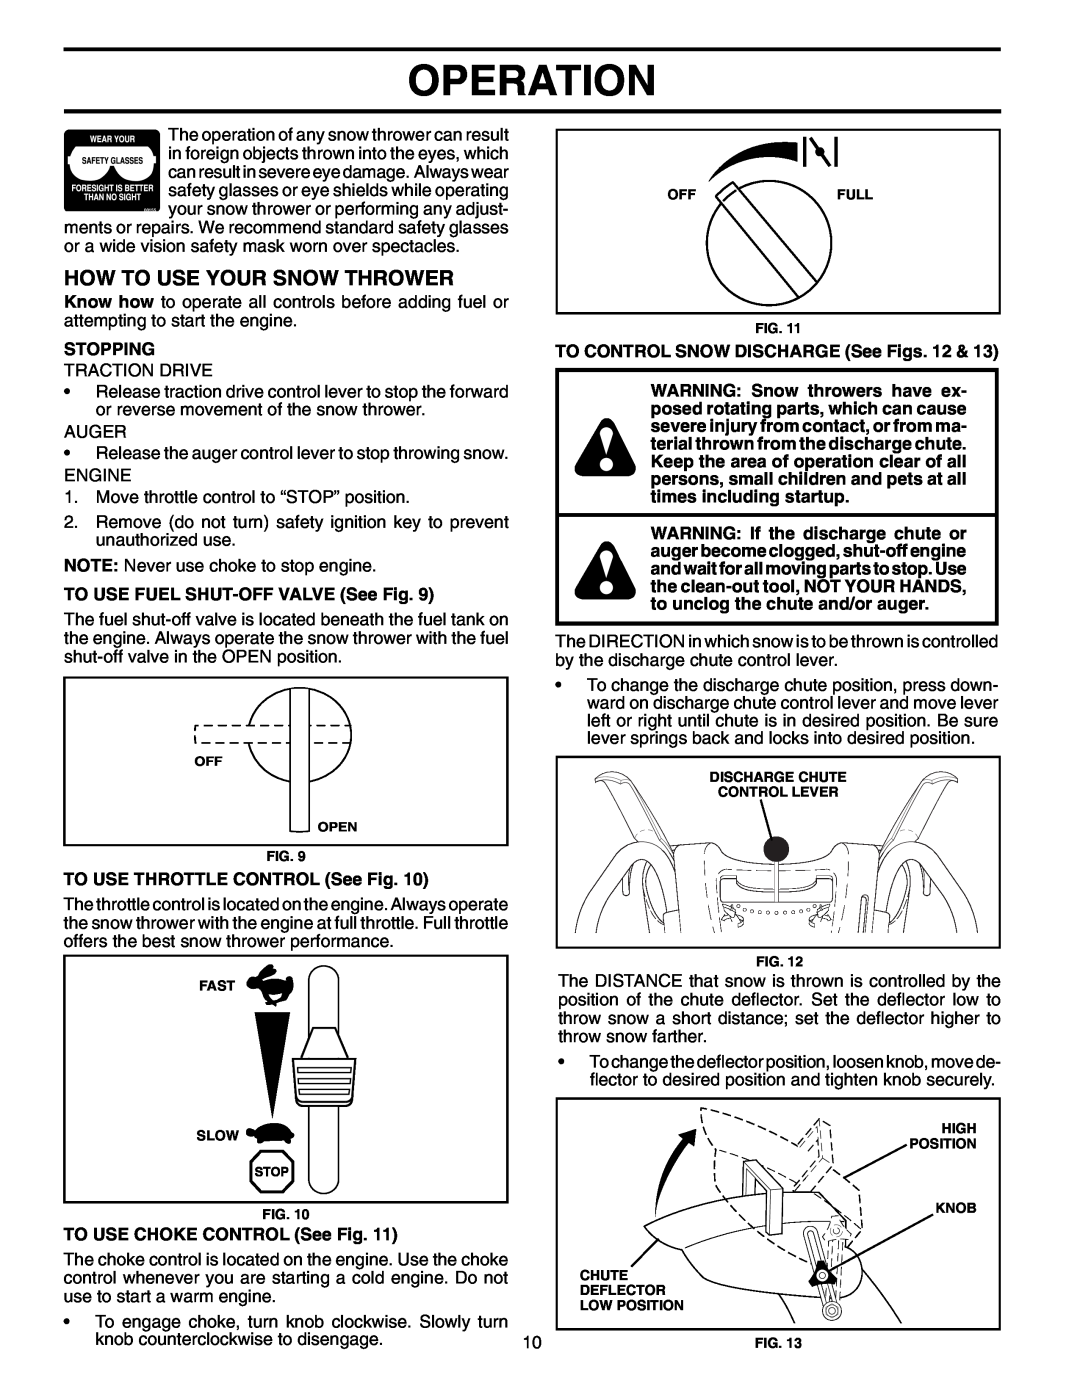 Poulan PP10530ES owner manual How To Use Your Snow Thrower, Operation, Stopping, TO USE FUEL SHUT-OFF VALVE See Fig 